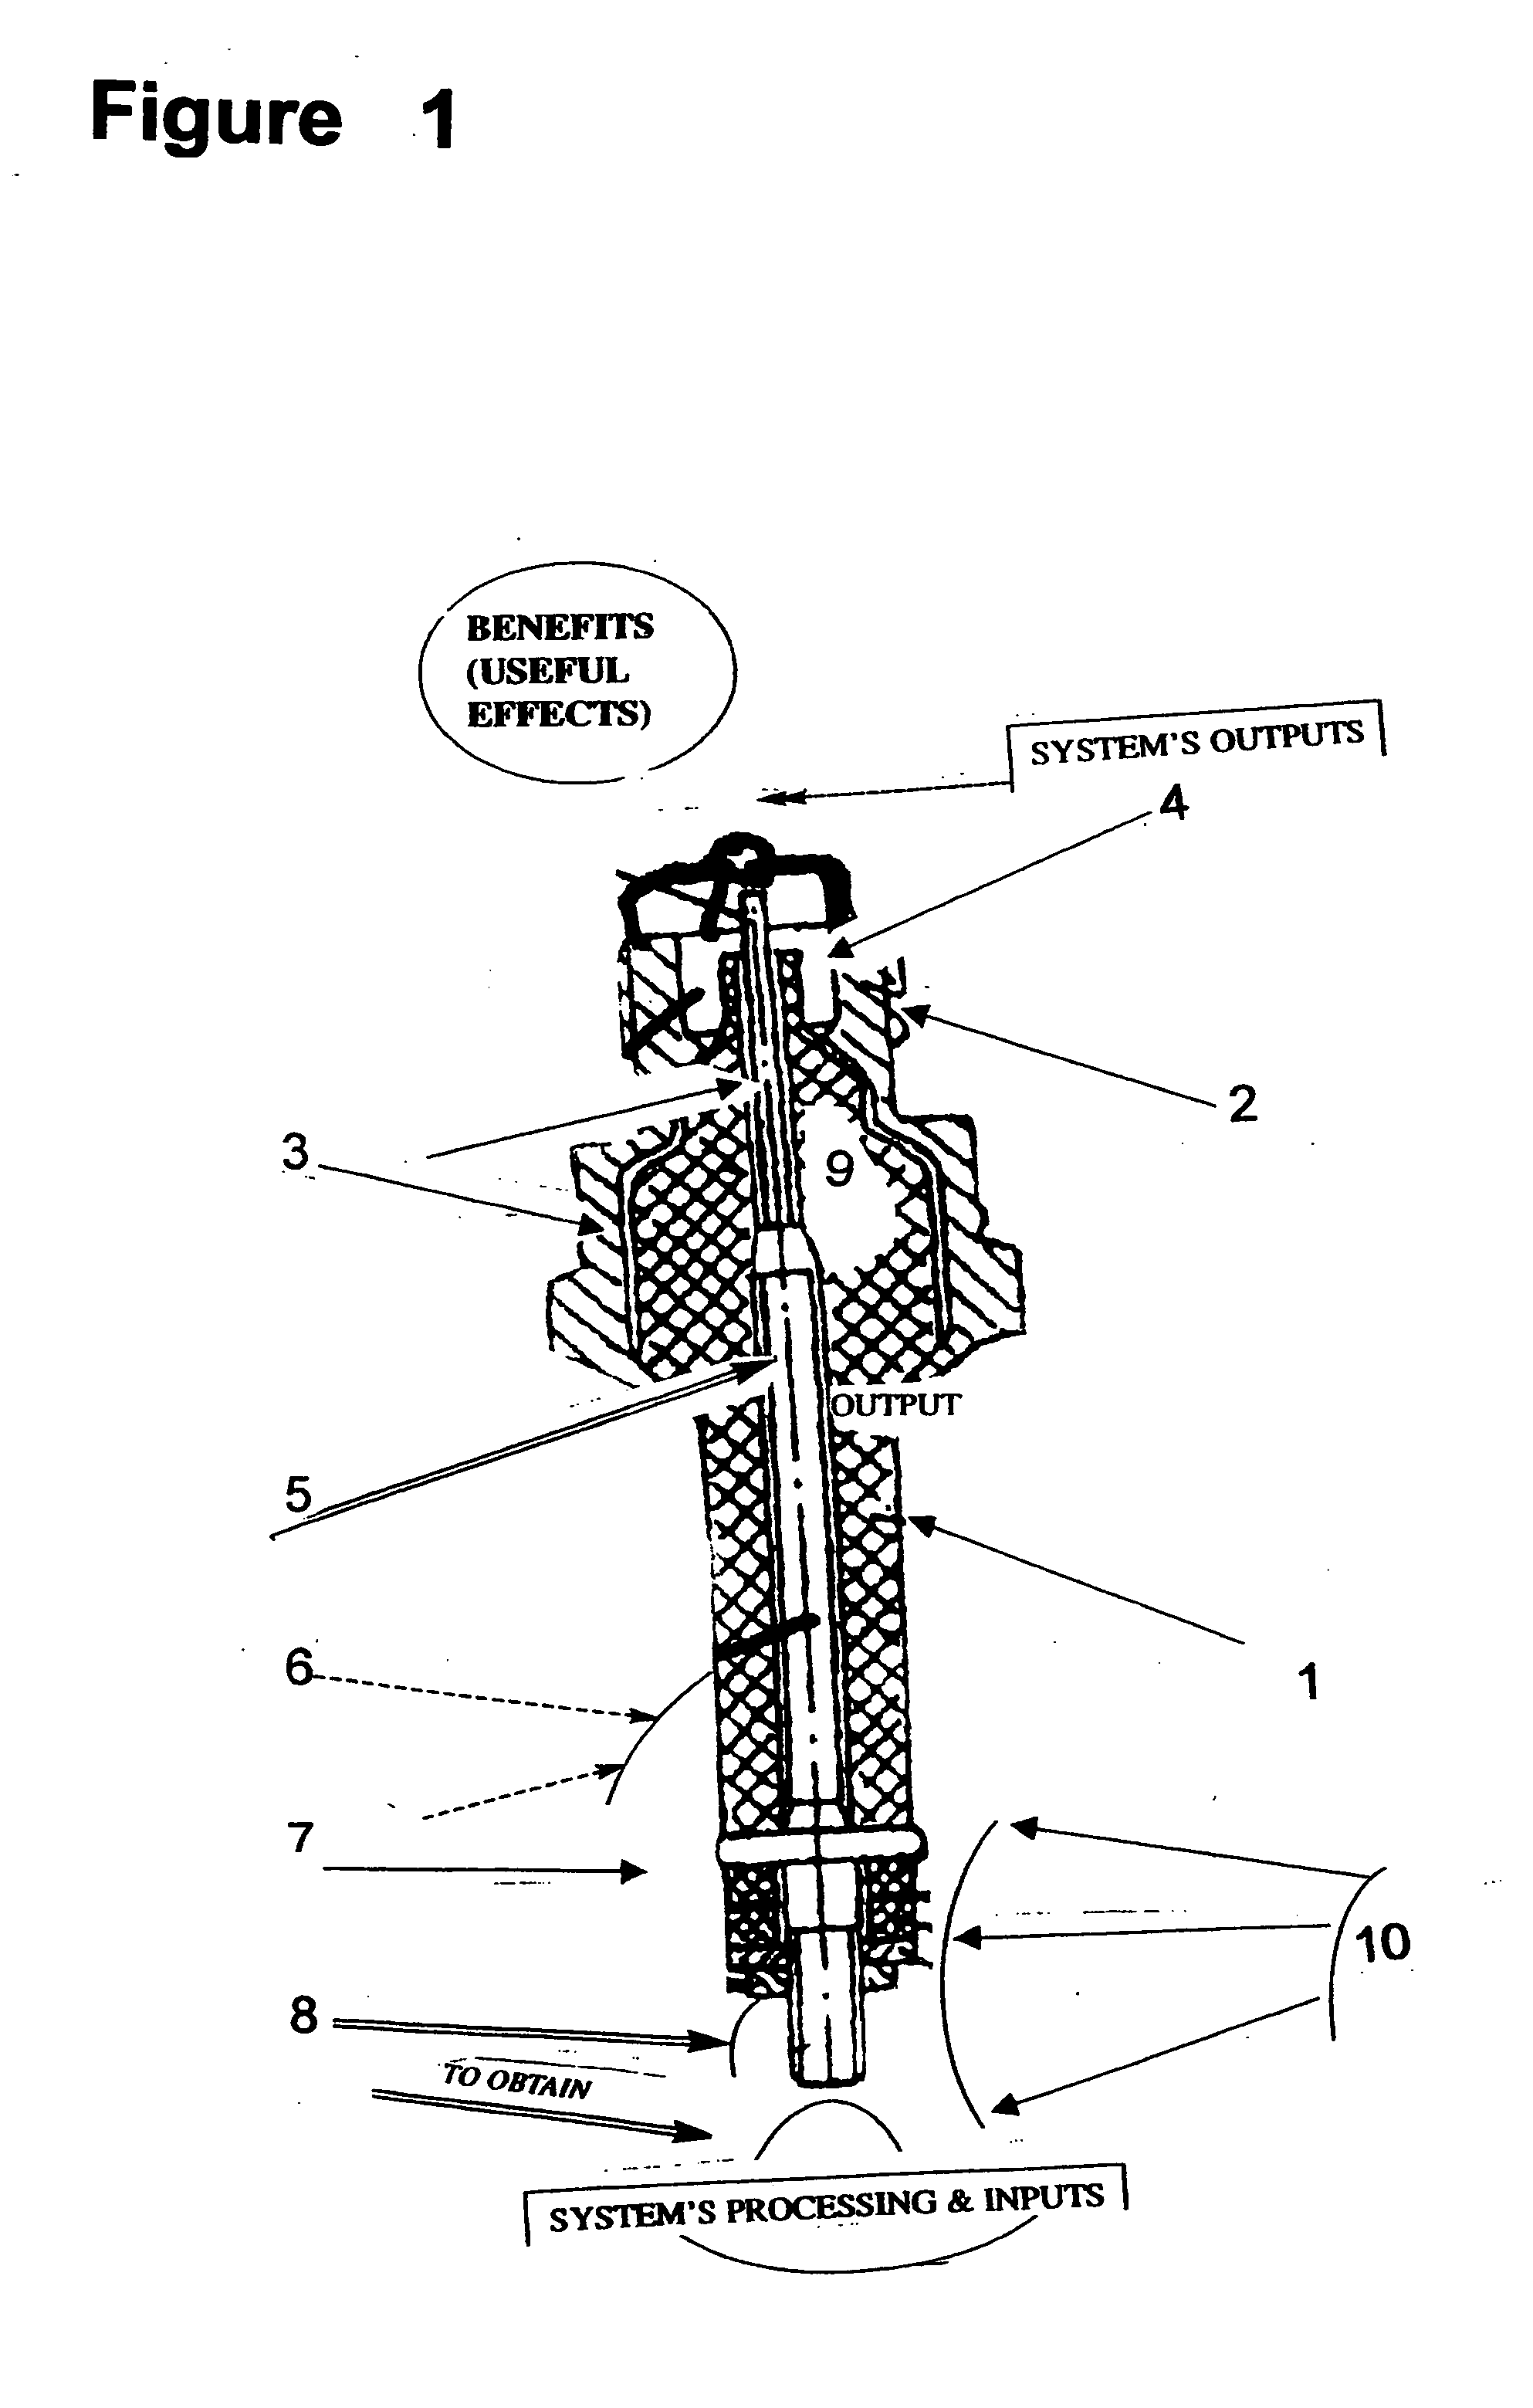 Higher-performance spark plug and ramrod engine ignition system using piezo-electric enhancement components